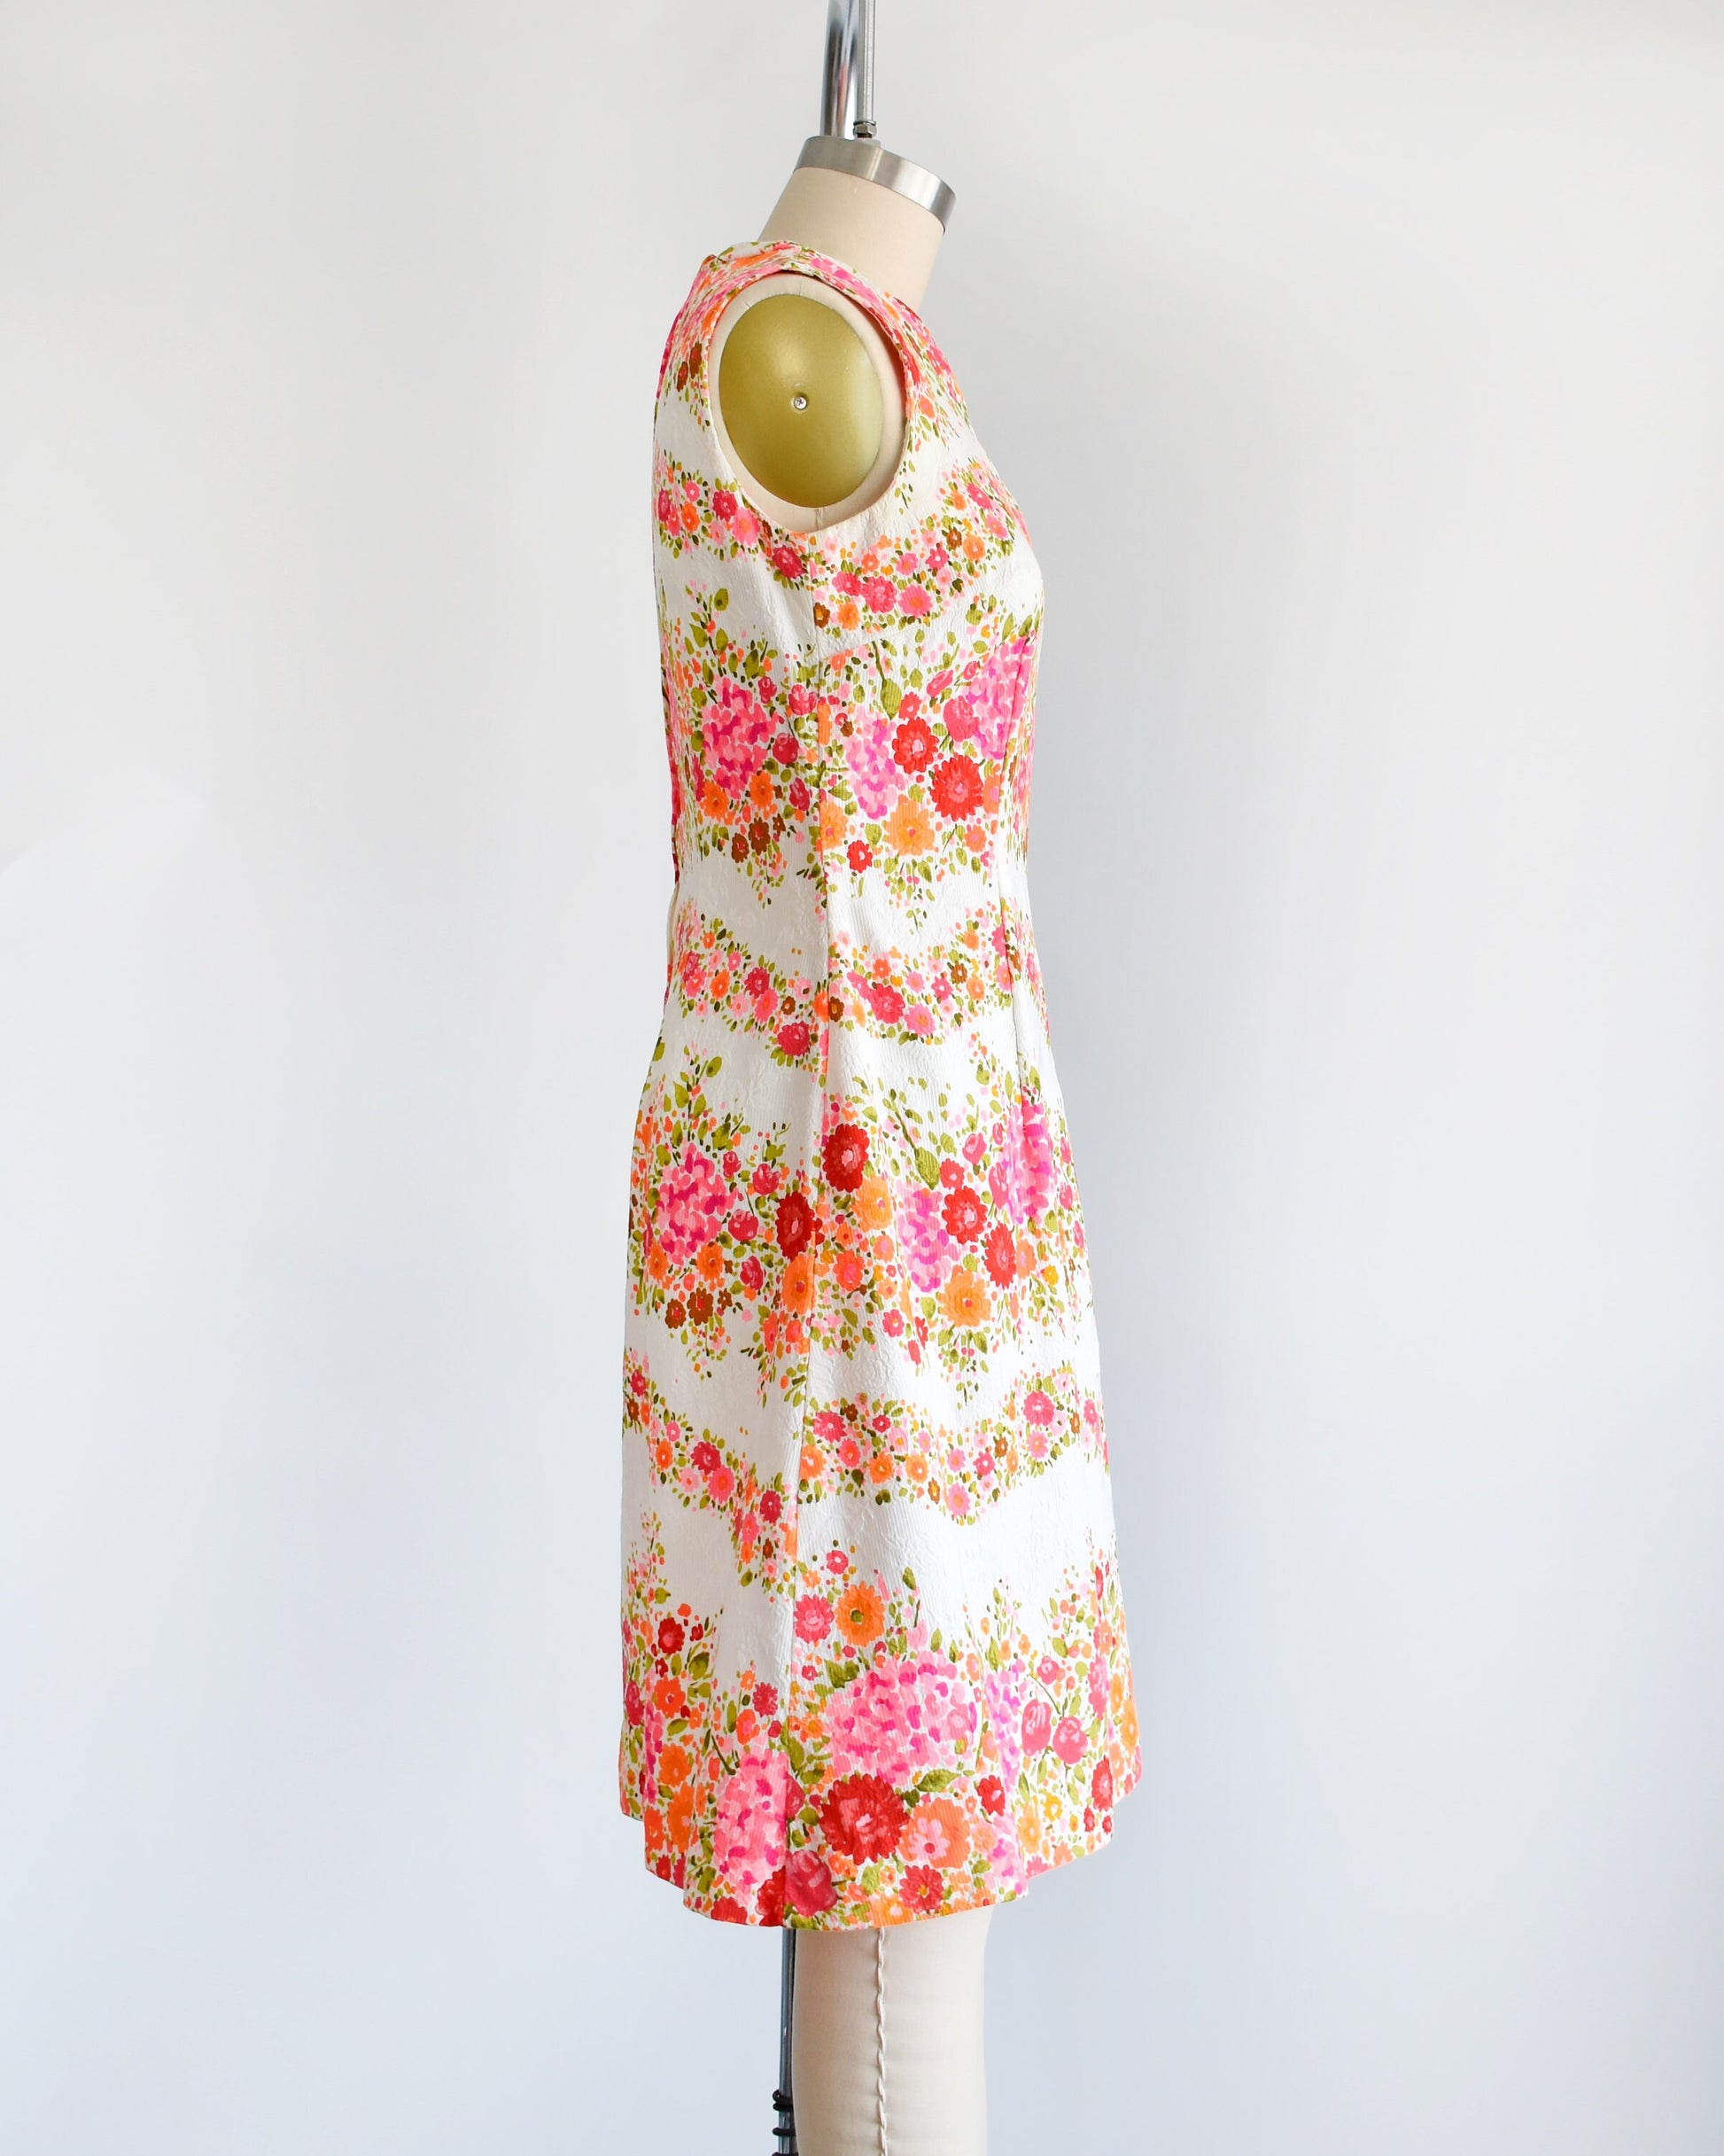 Side view of a vintage 60s/70s white dress that has a vibrant pink, orange, and green floral print in wavy horizontal stripes going down the dress. The dress is on a dress form.